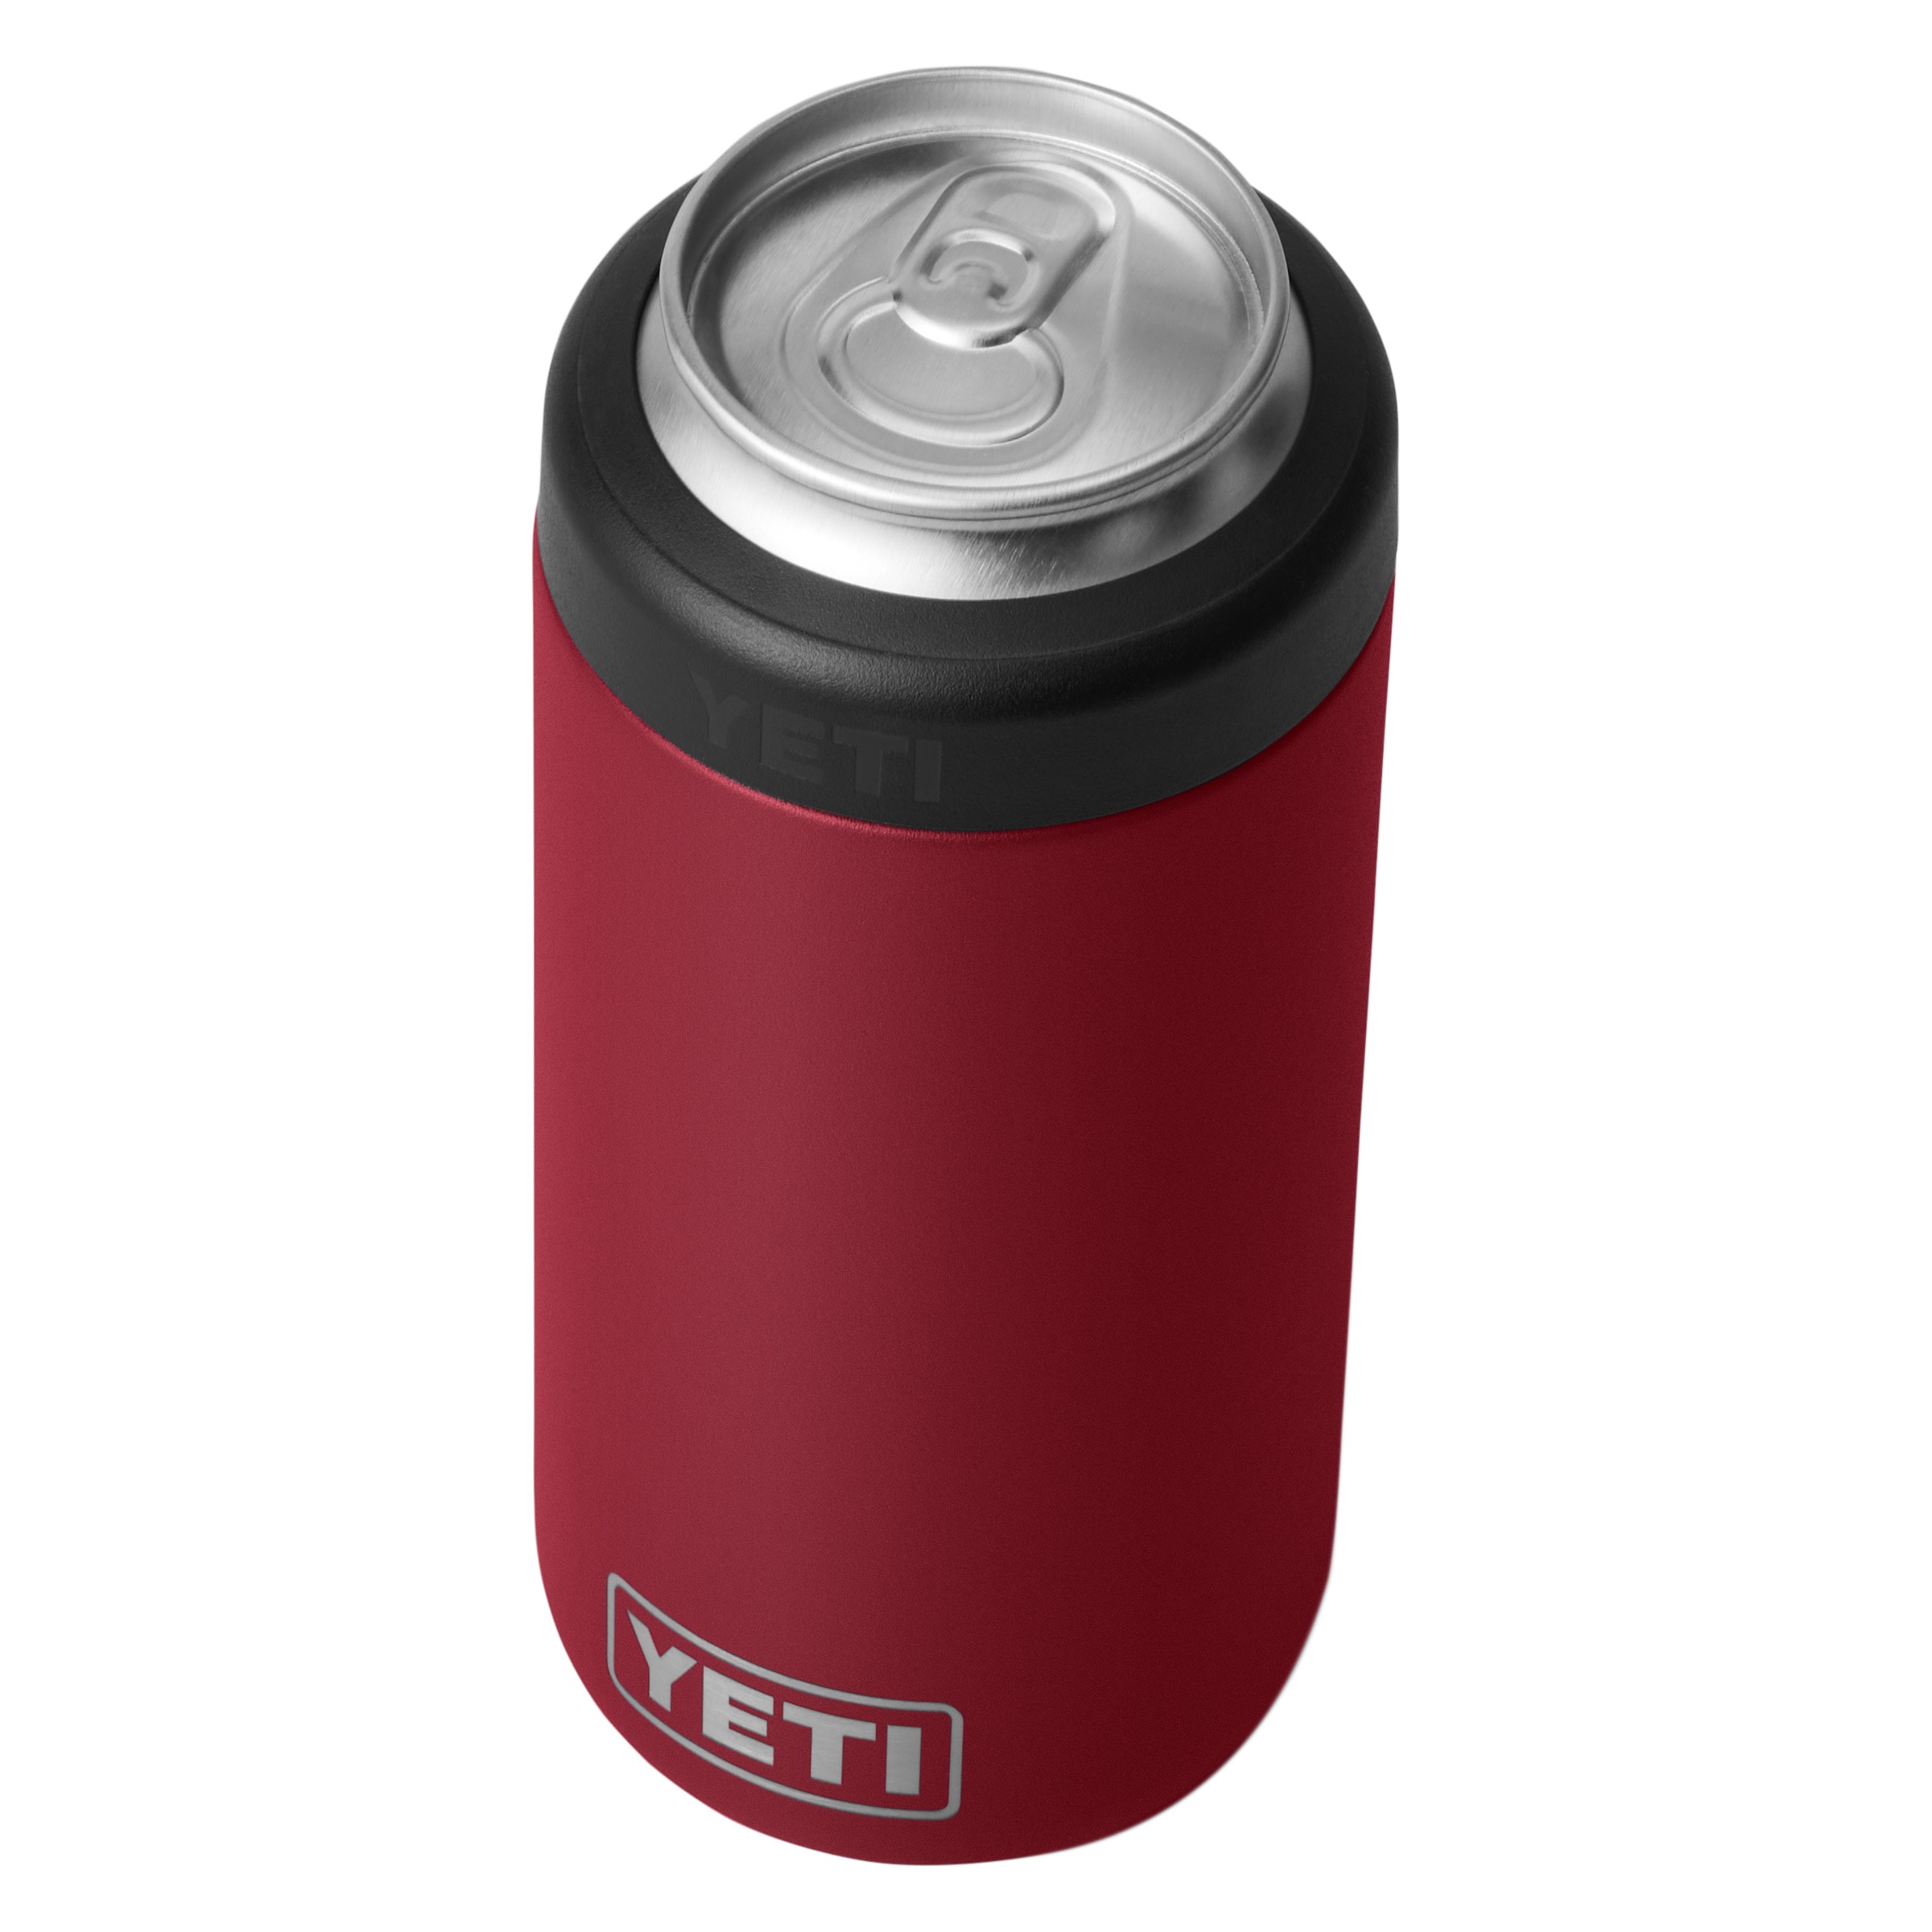 YETI 16oz Colster Adapter - 1 Adapter to Fit (Almost) All Sizes!